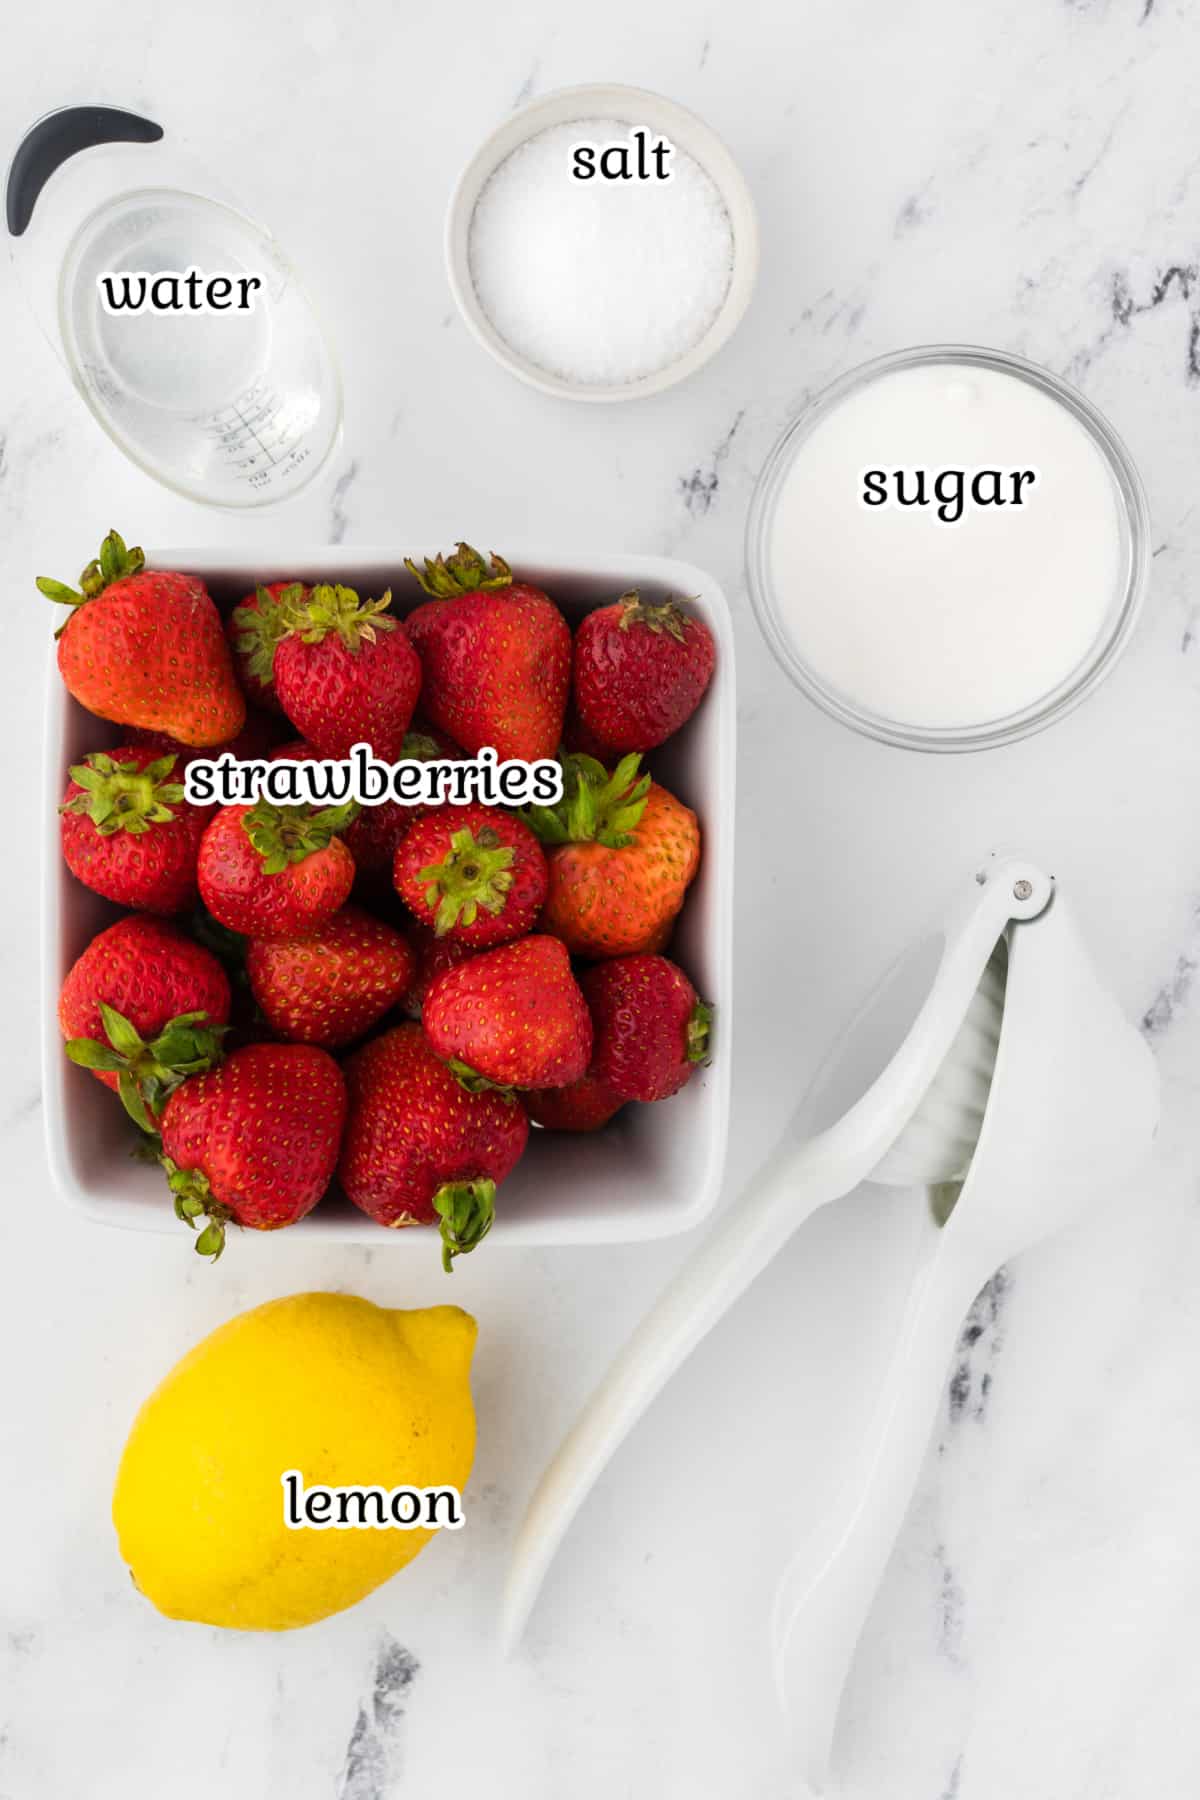 Image of recipe ingredients with text overlay.